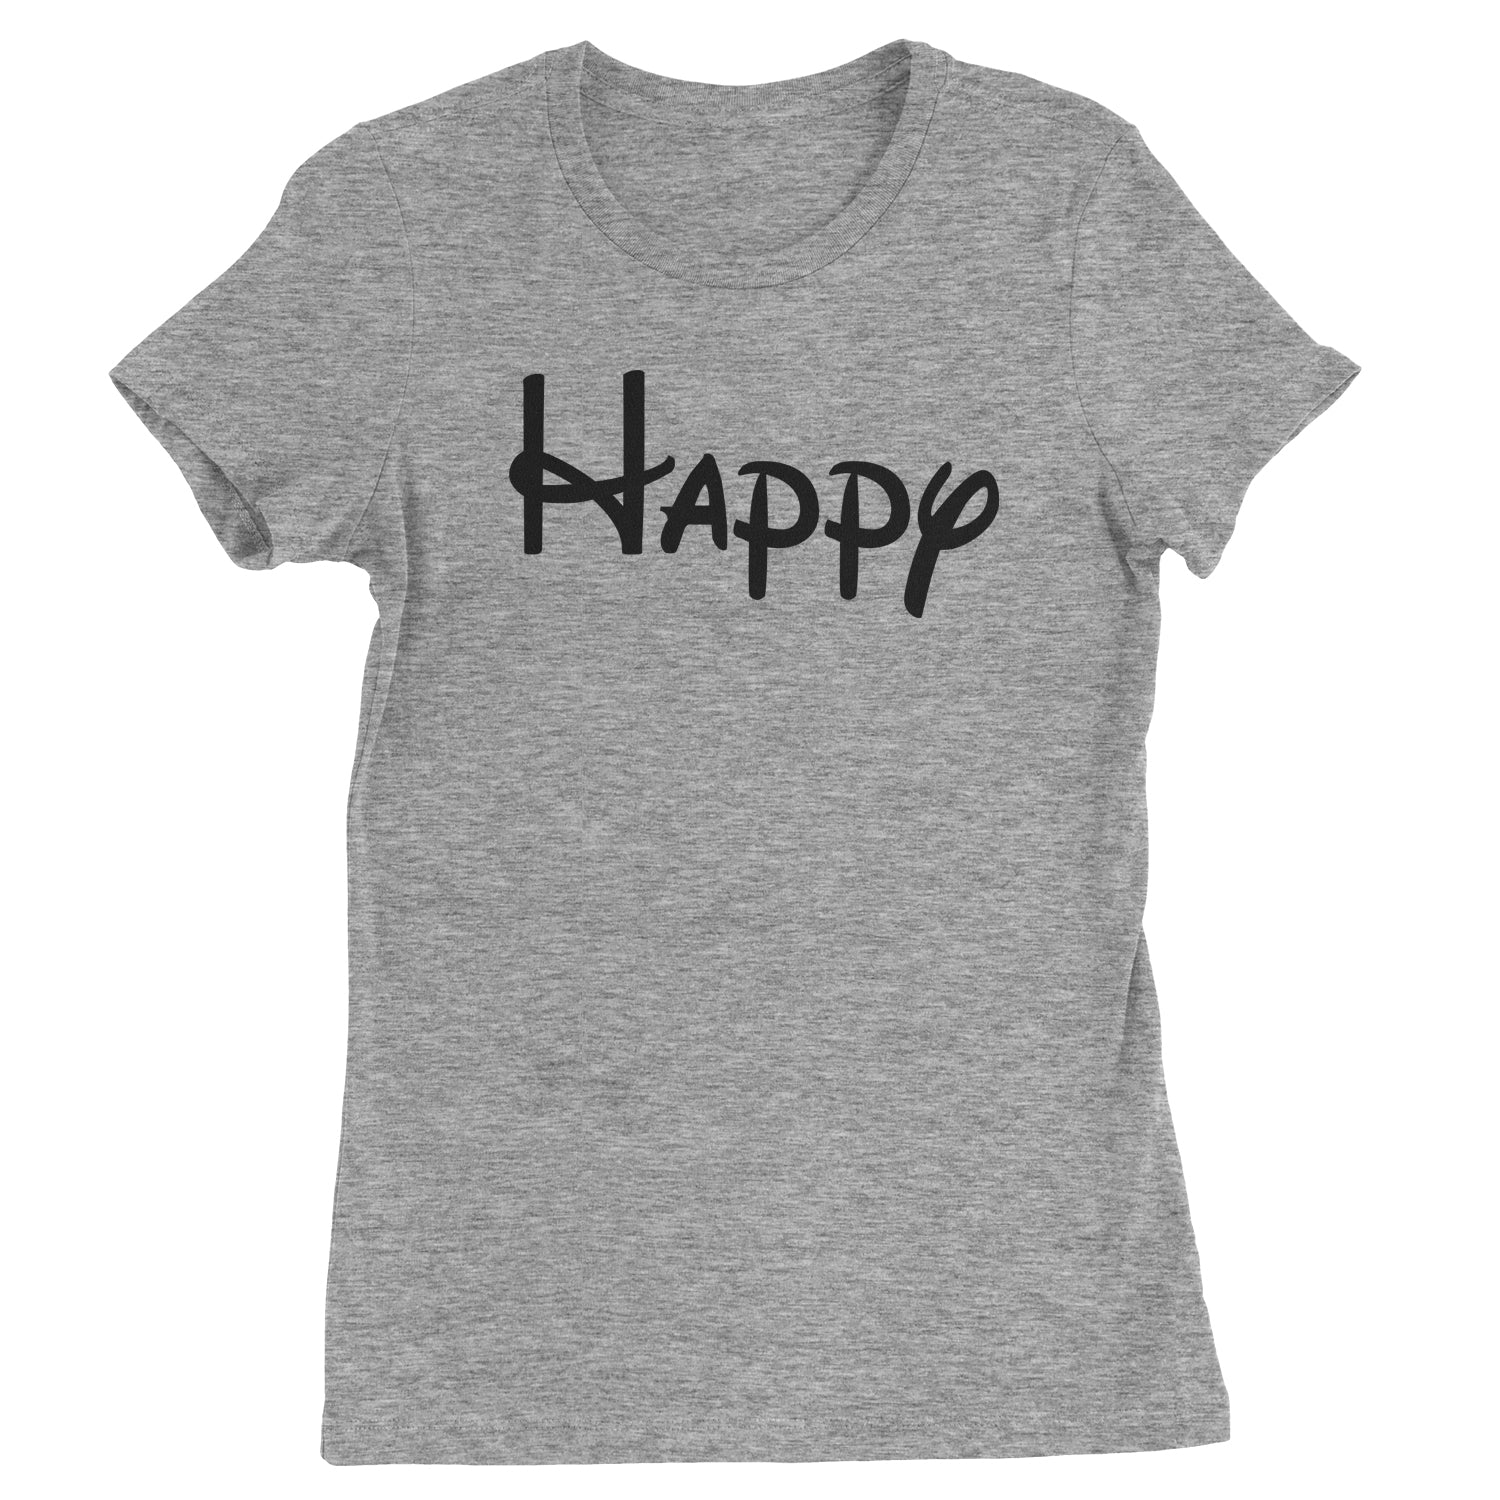 Happy - 7 Dwarfs Costume Womens T-shirt and, costume, dwarfs, group, halloween, matching, seven, snow, the, white by Expression Tees